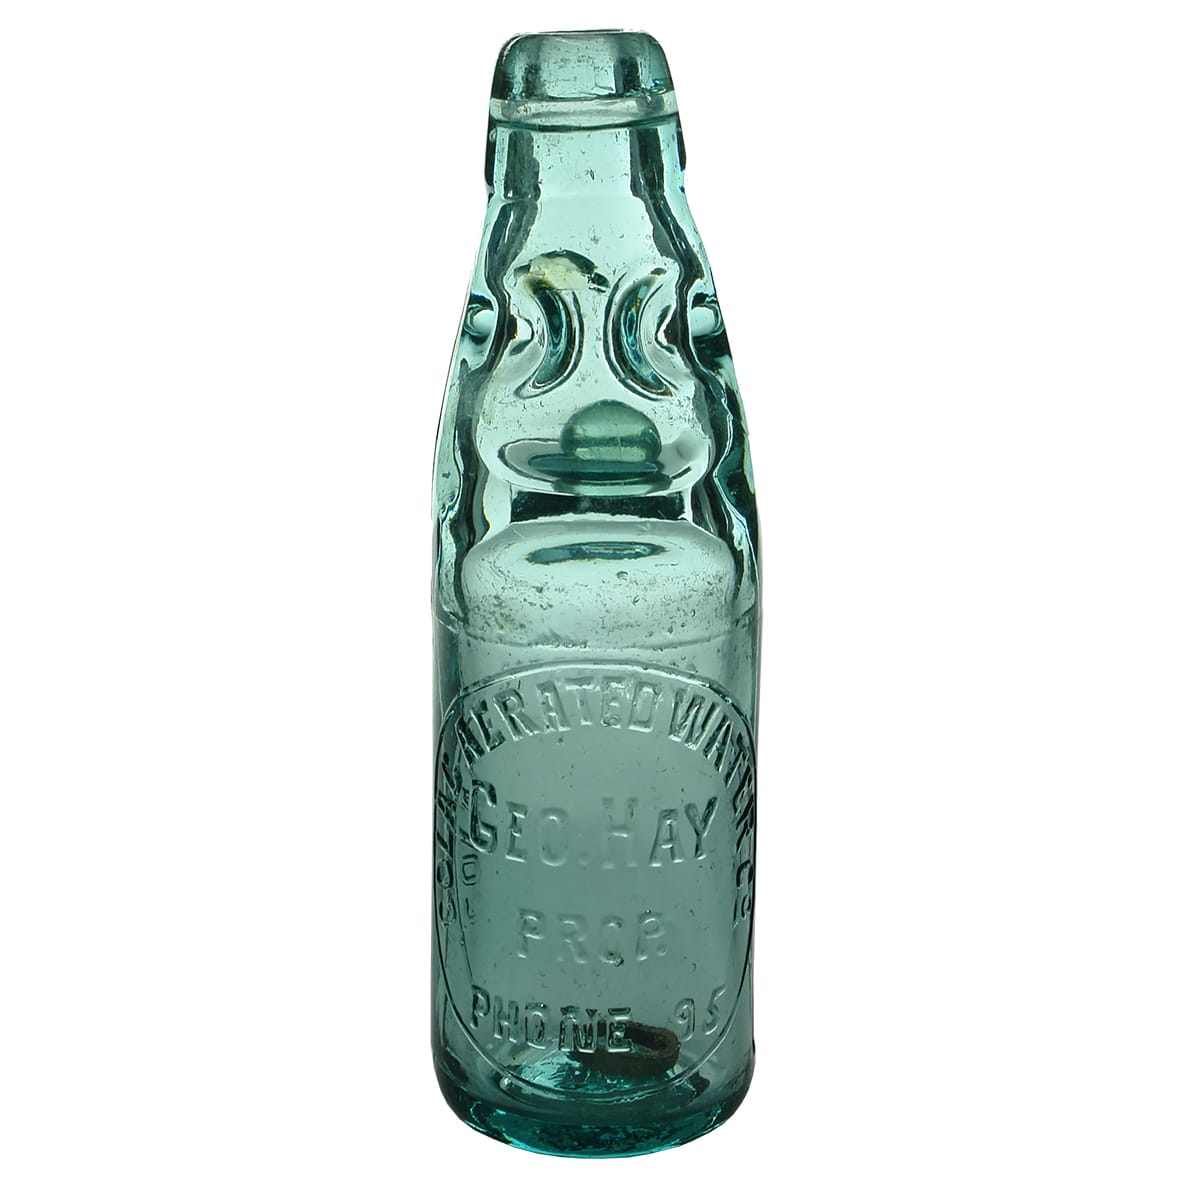 Codd. Colac Aerated Water Co. Dobson. 6 oz.